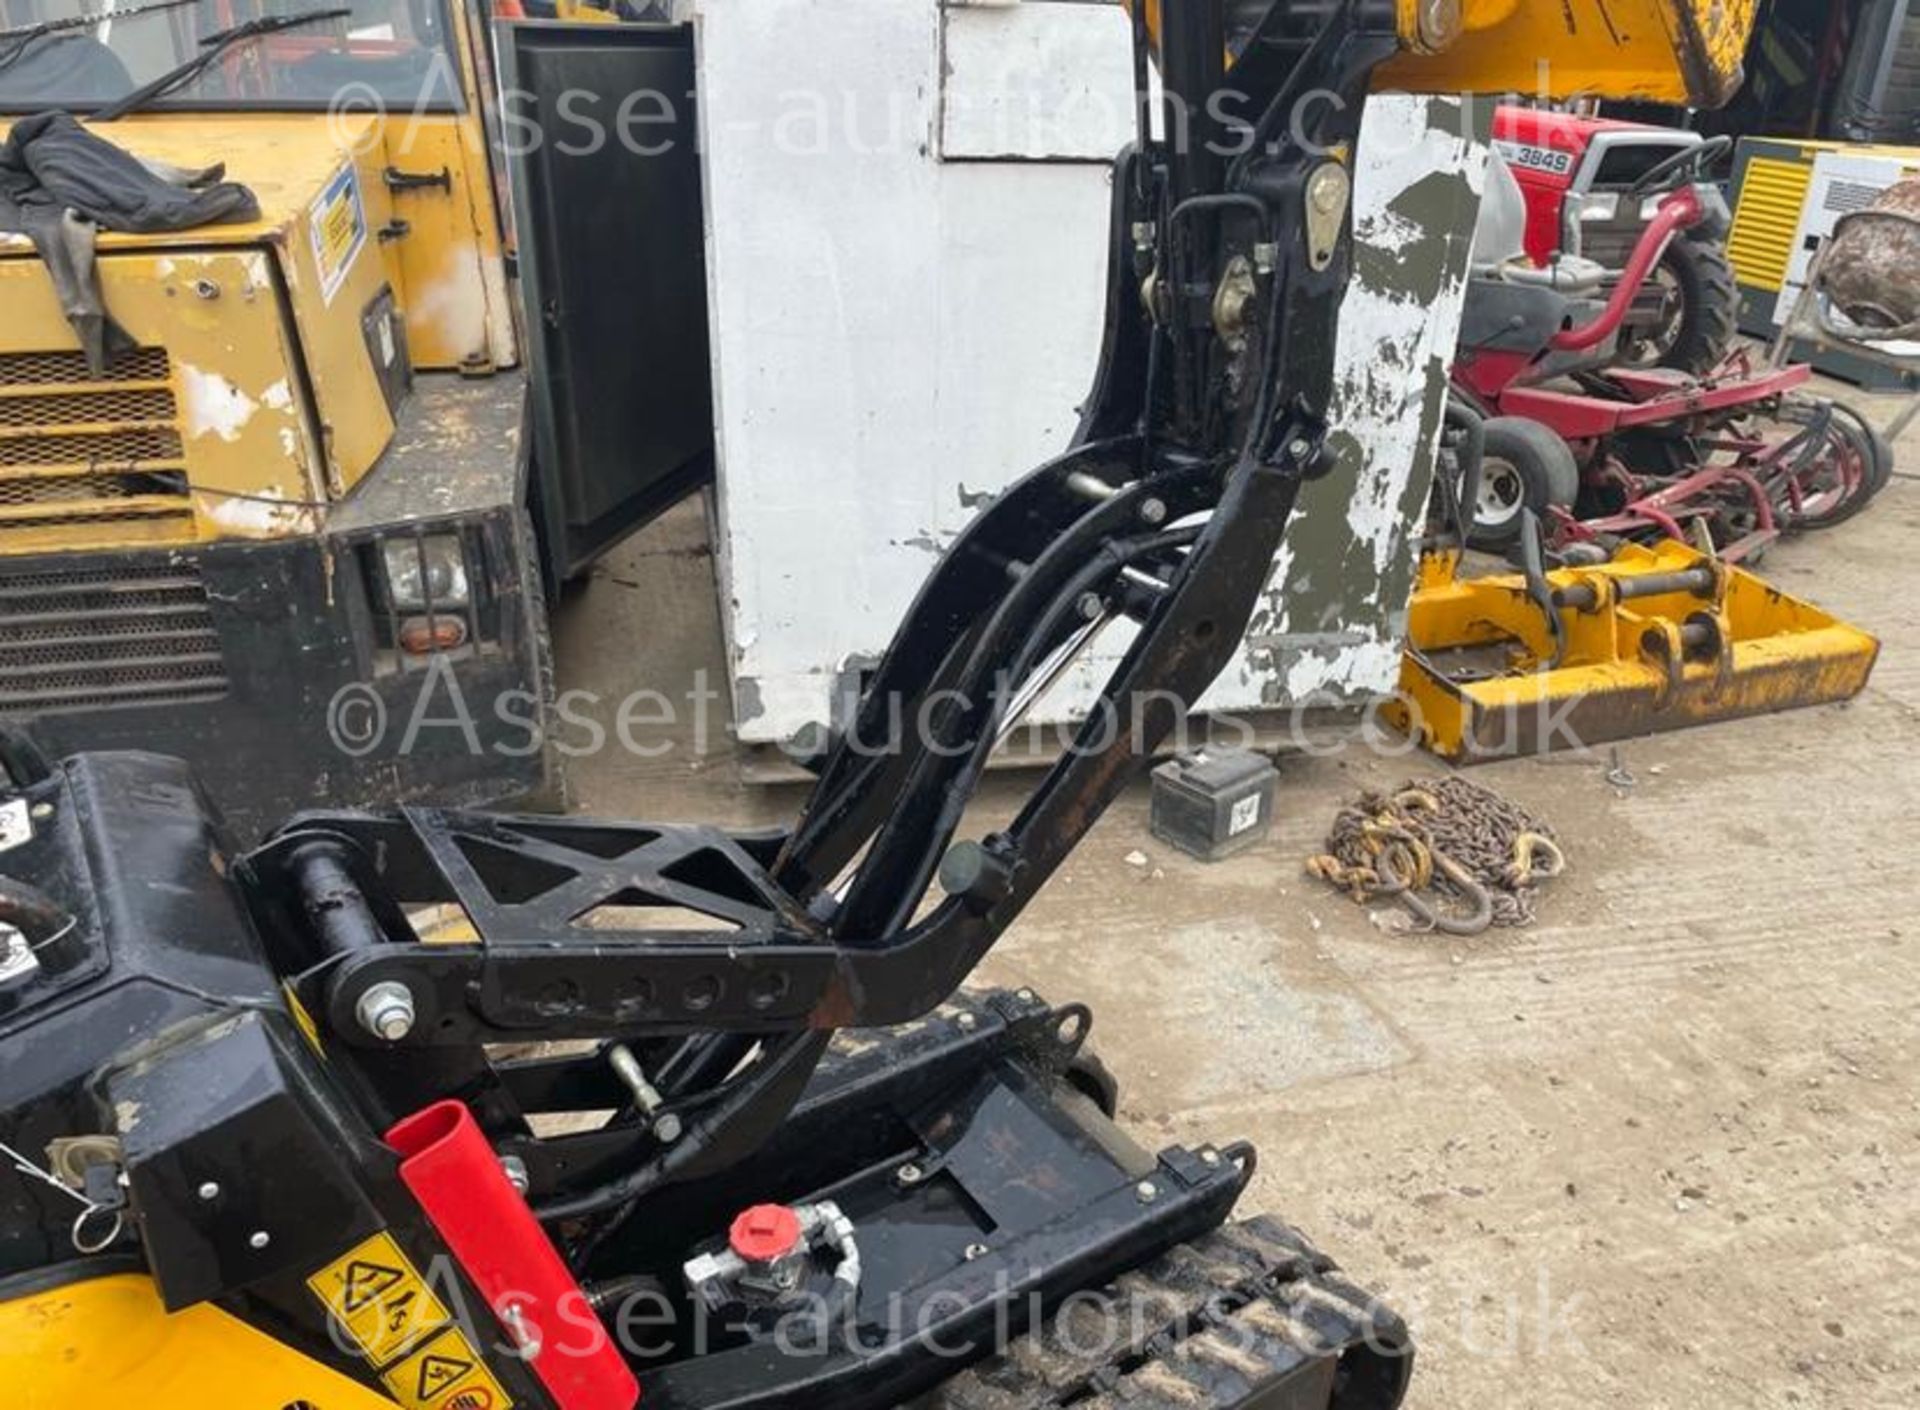 2019 JCB HTD-5 DIESEL TRACKED DUMPER, RUNS DRIVES AND WORKS WELL, ELECTRIC OR PULL START *PLUS VAT* - Image 13 of 20